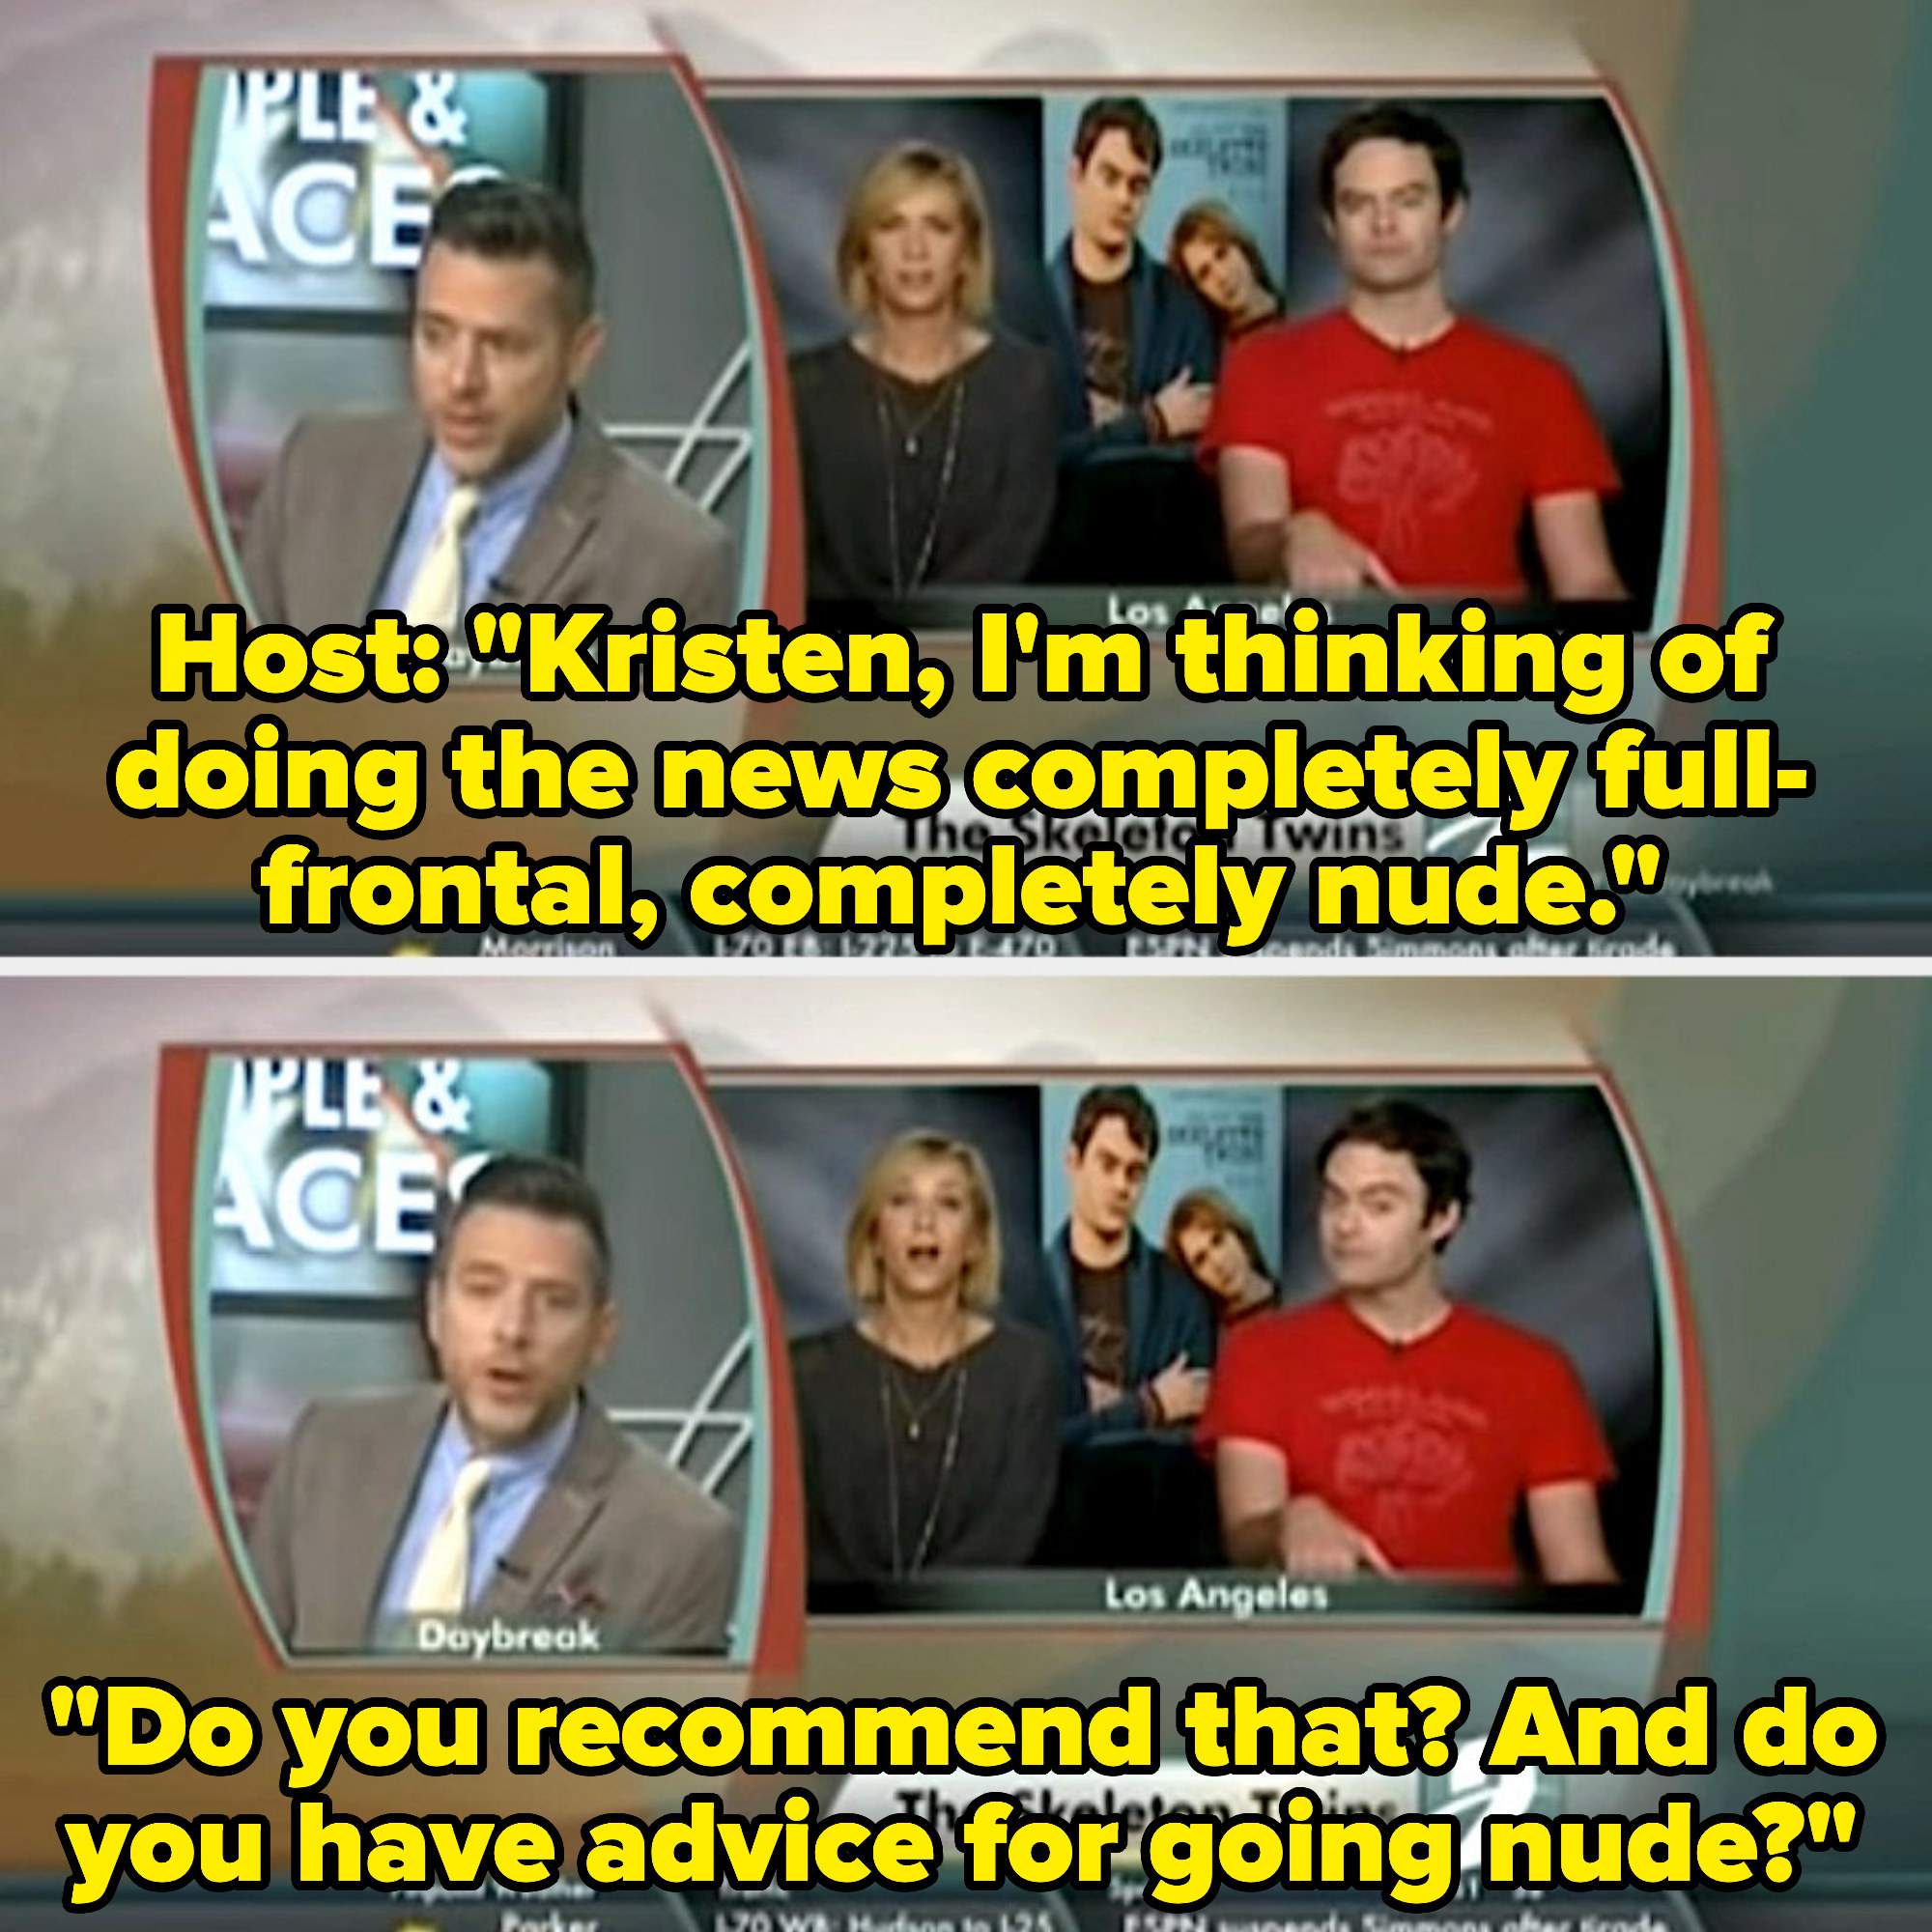 host asking kristen if she recommends for him to do the news fully nude?